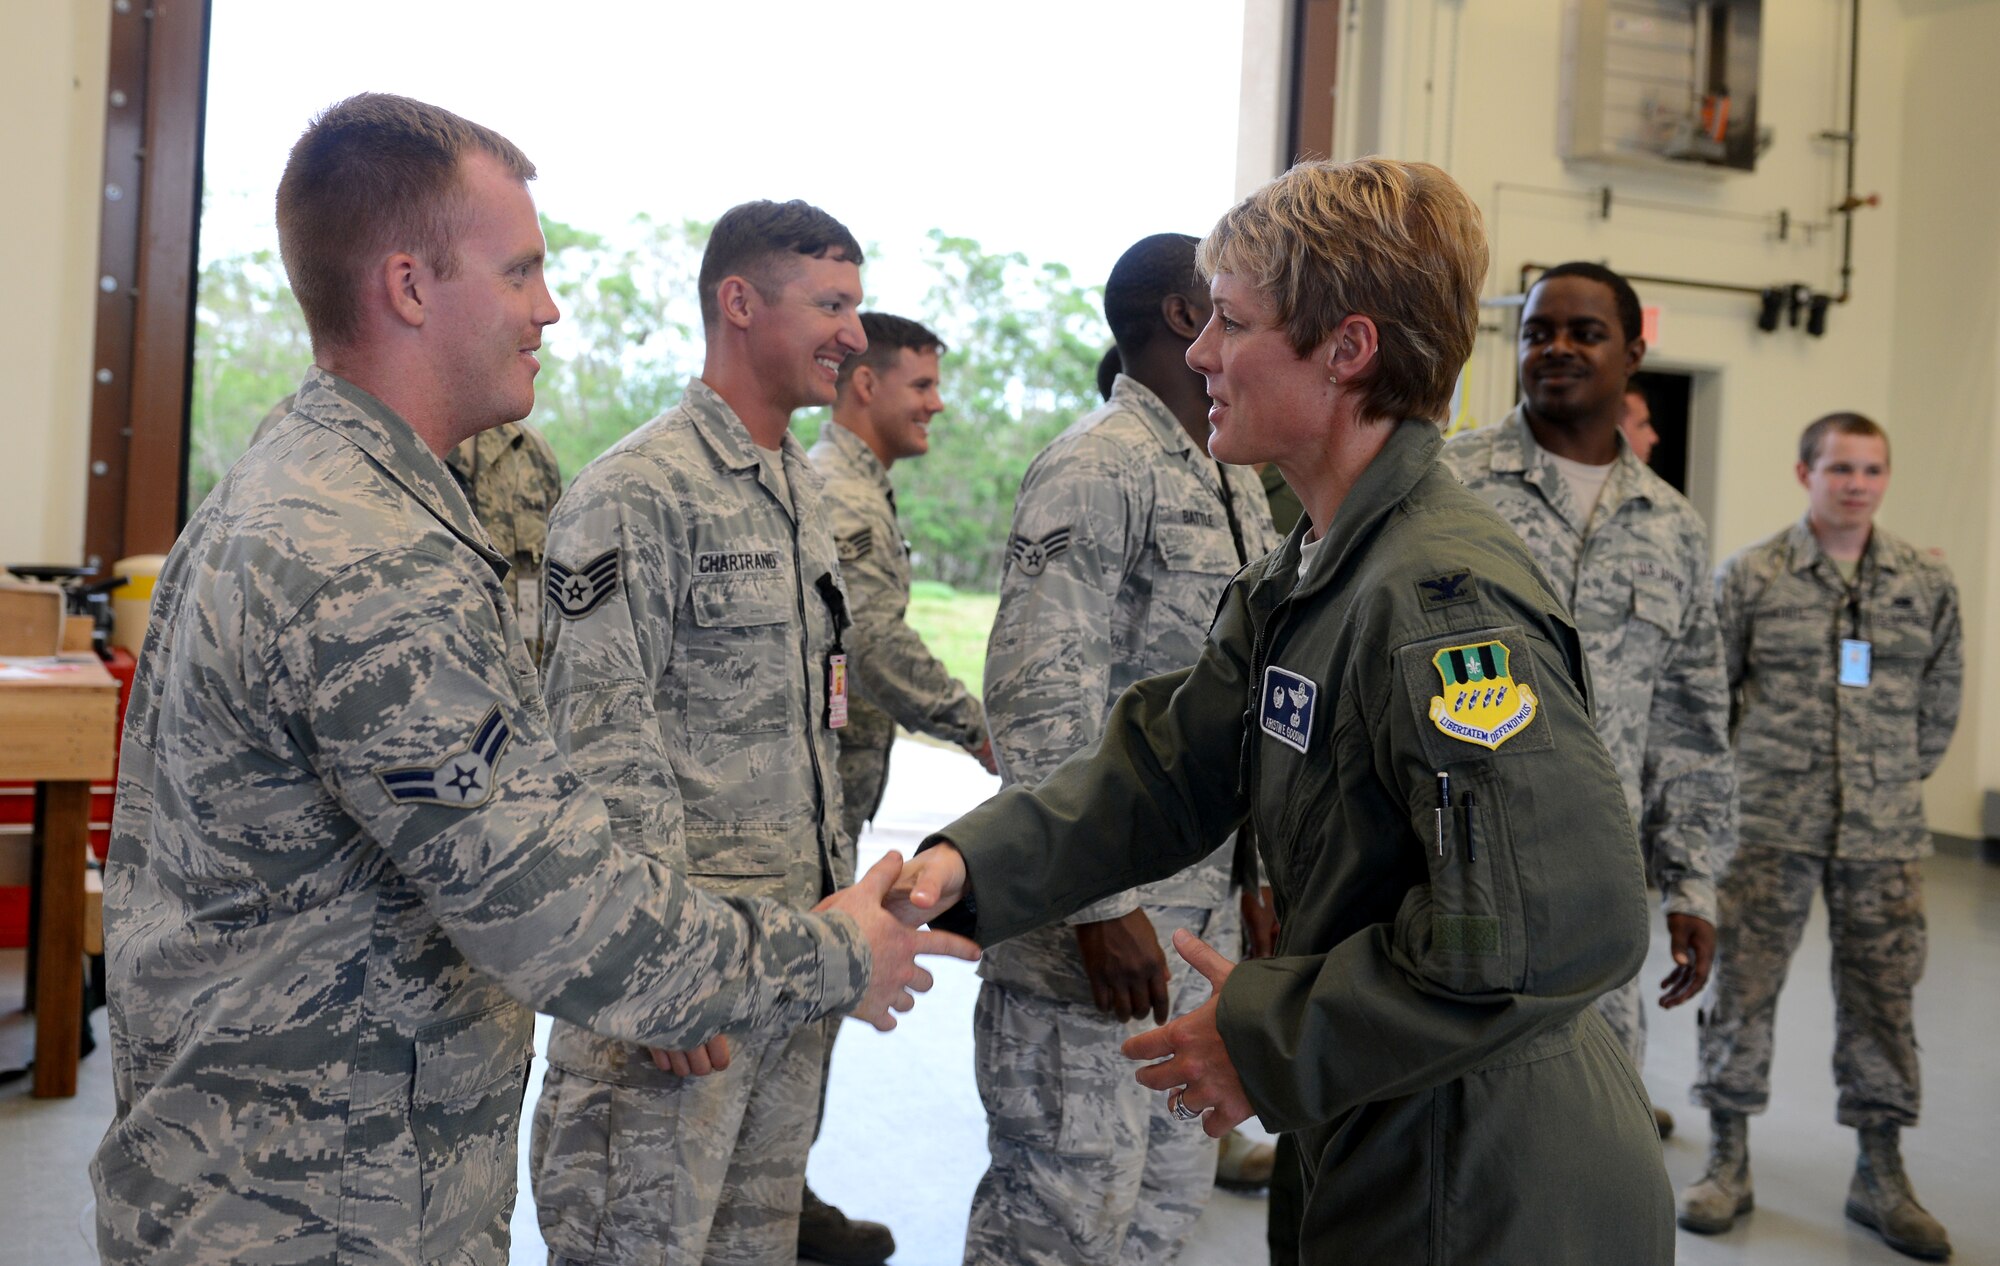 Col. Kristin Goodwin, 2nd Bomb Wing meets with Airmen from the 36th Munitions Squadron June 3, 2015, at Andersen Air Force Base, Guam. Goodwin toured Andersen to meet with the units and Airmen in support of U.S. Pacific Command’s Continuous Bomber Presence mission. (U.S. Air Force photo by Airman 1st Class Arielle Vasquez/Released)